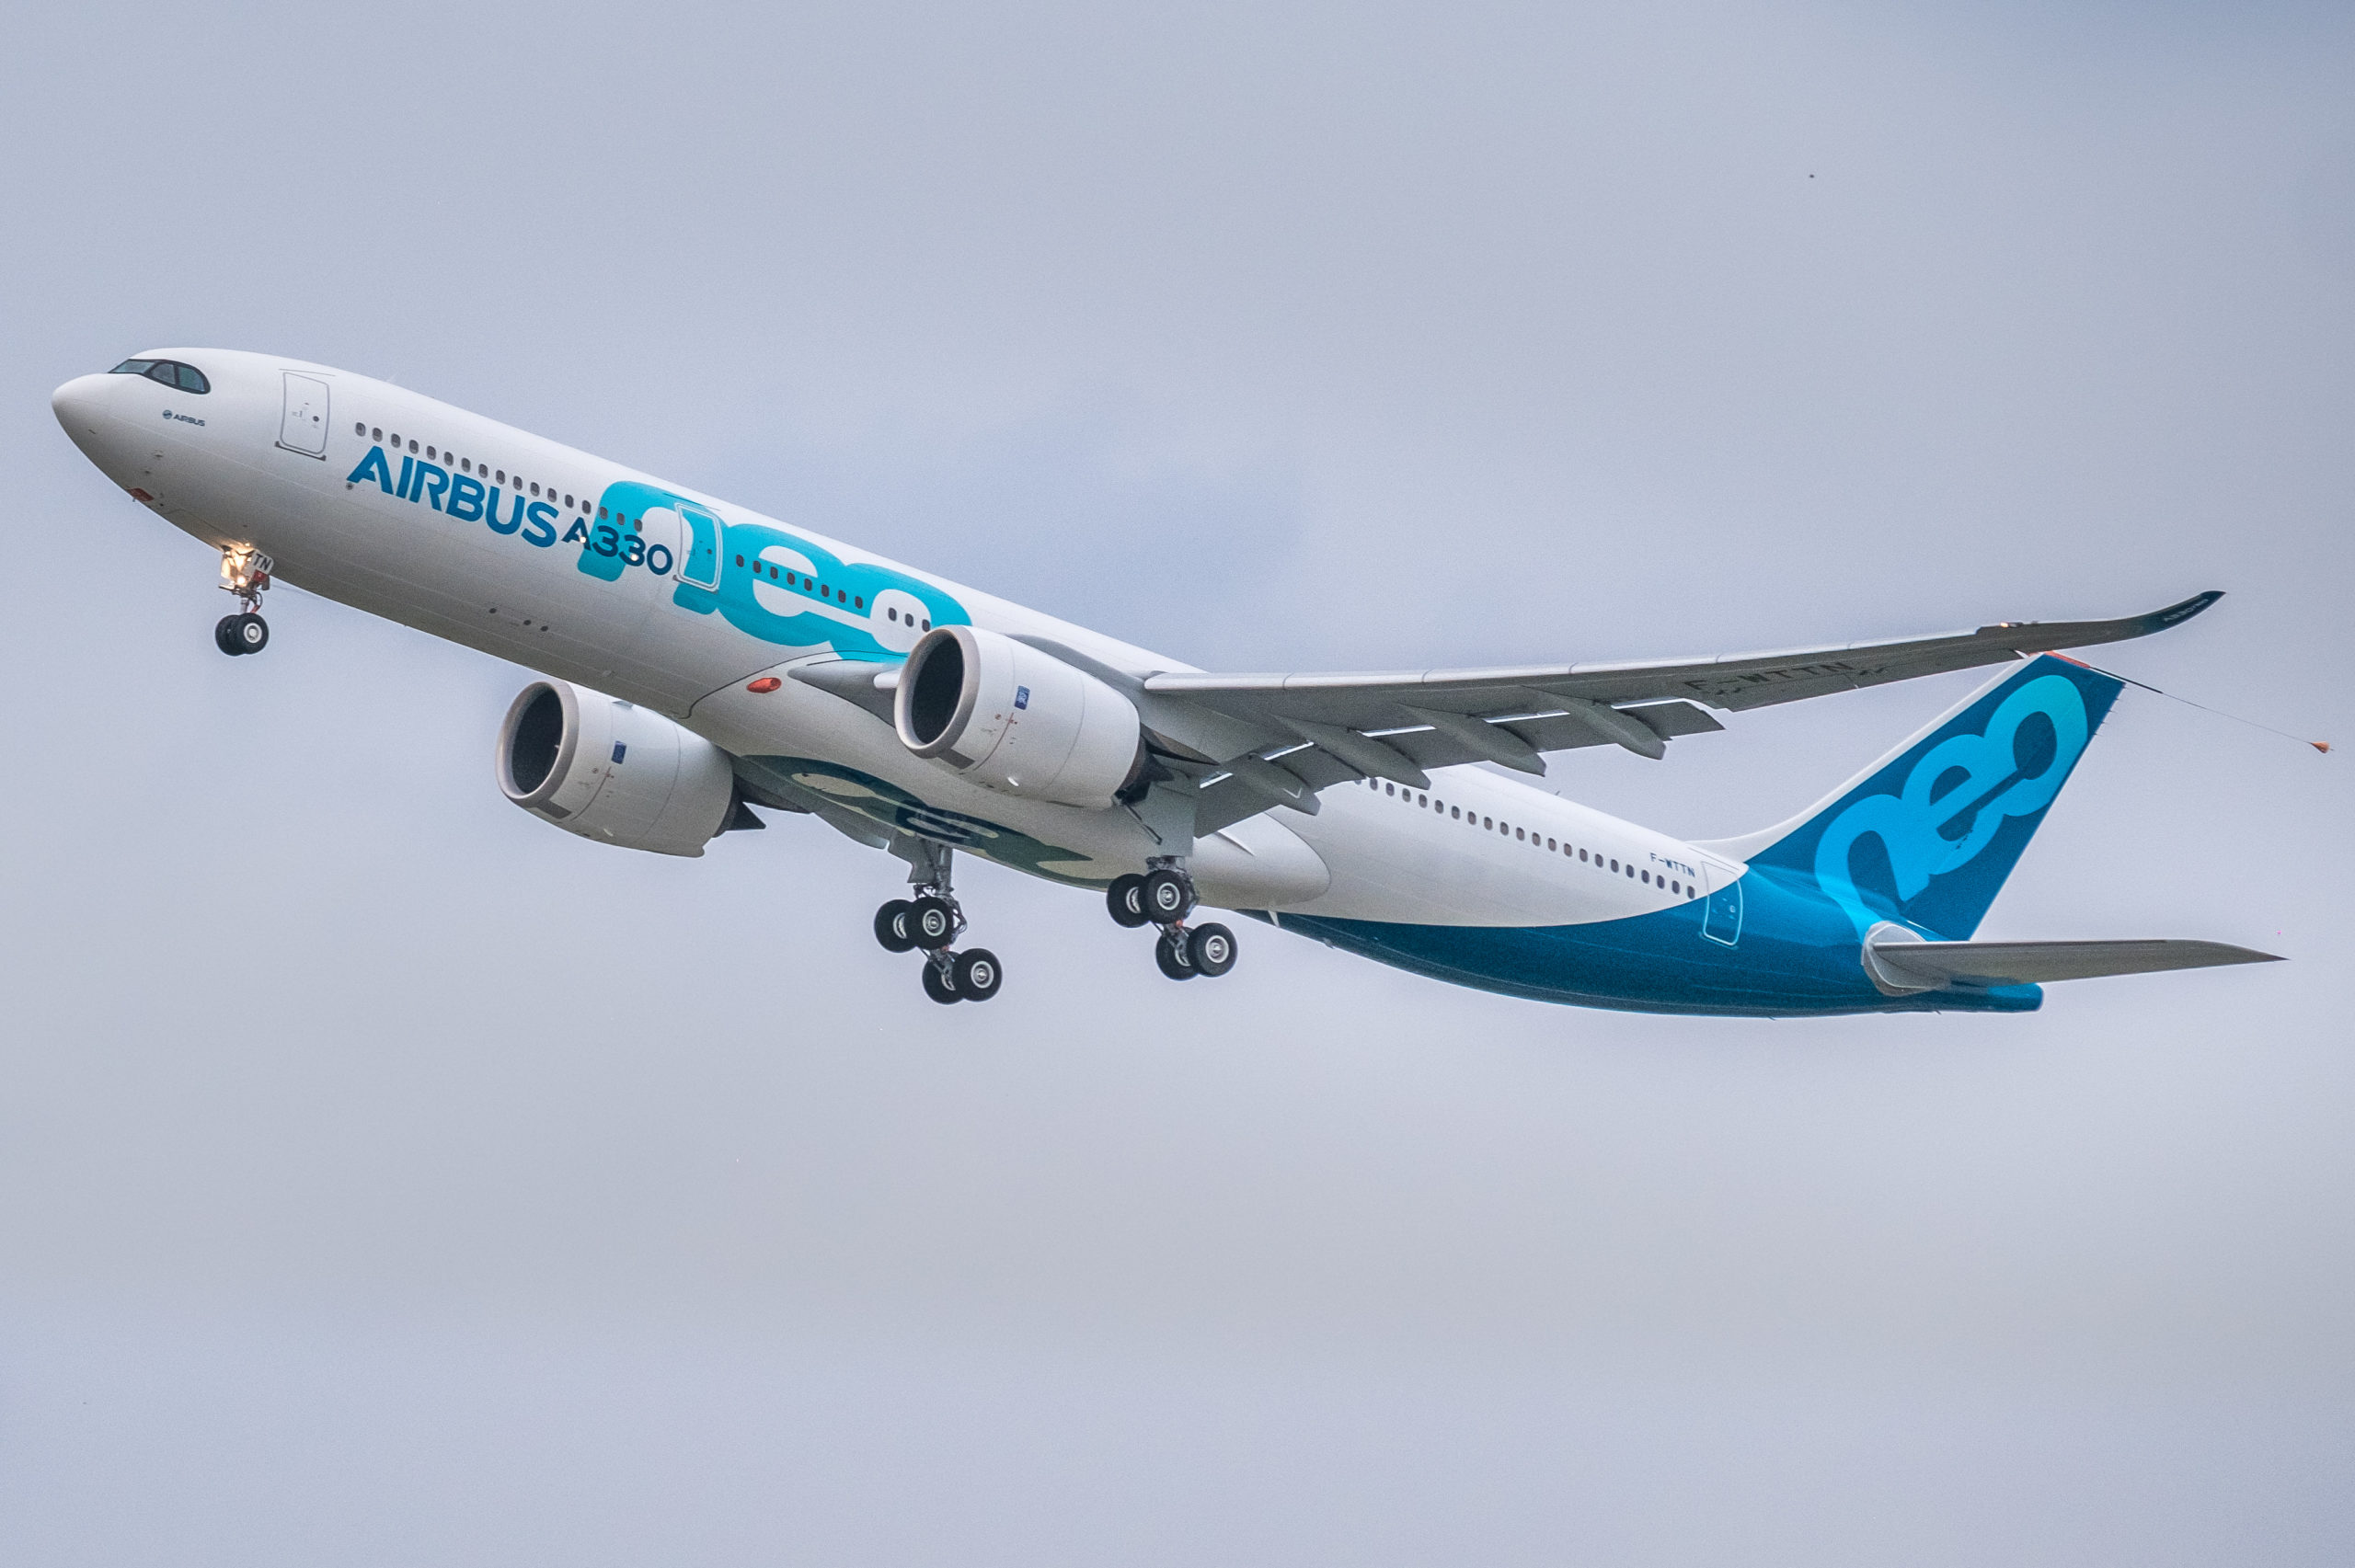 Airbus will deliver the first A330-900neo to launch customer TAP Portugal this summer. That airplane will carry passengers, but a freighter variant may follow.